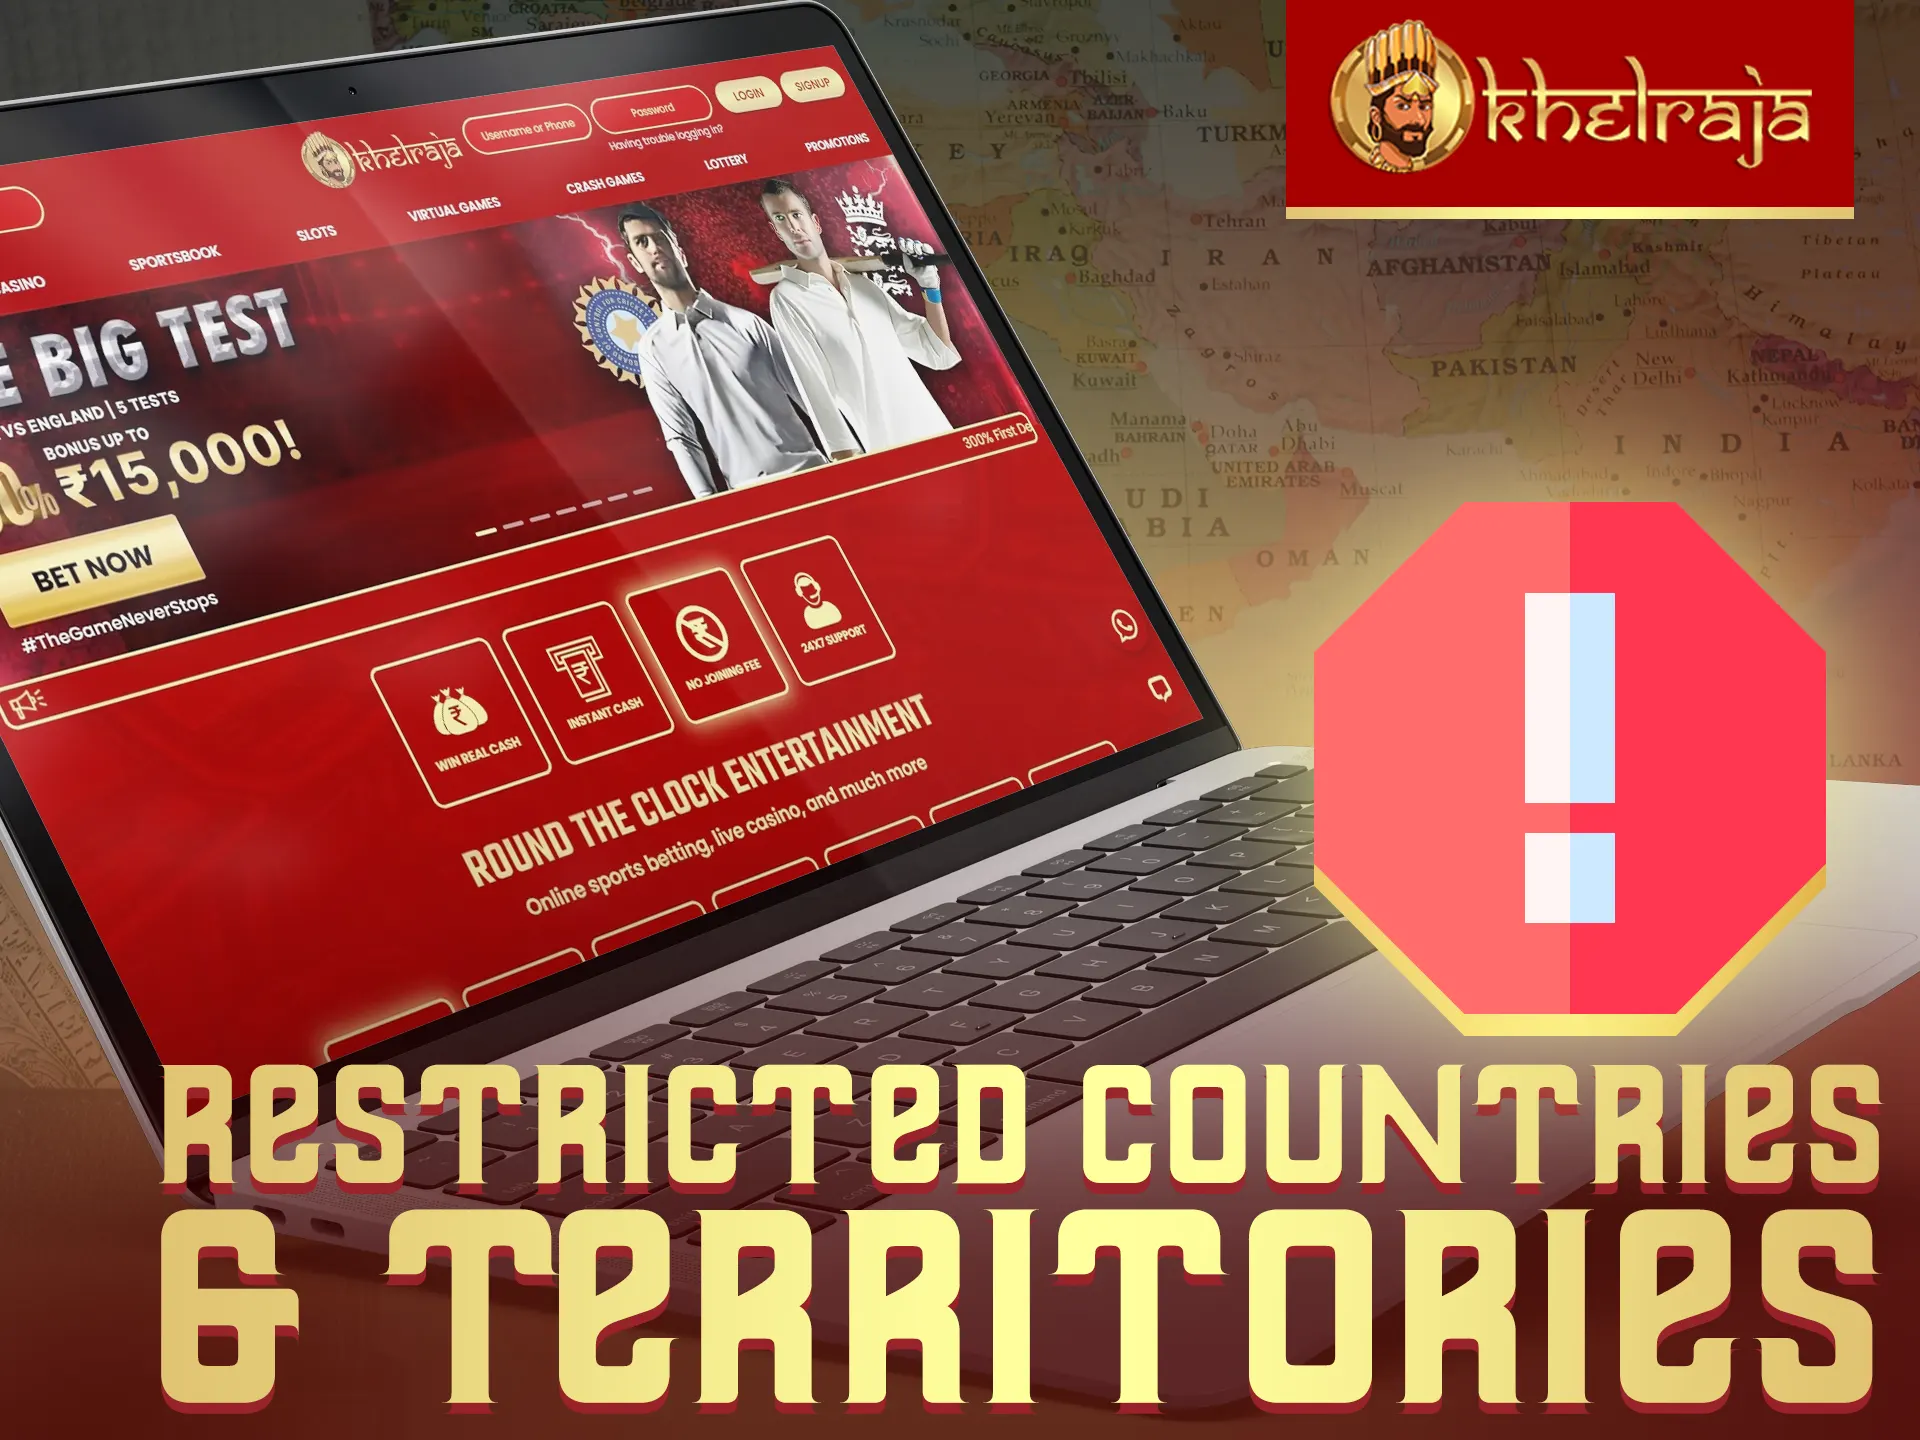 Khelraja Casino restricts certain countries from playing.